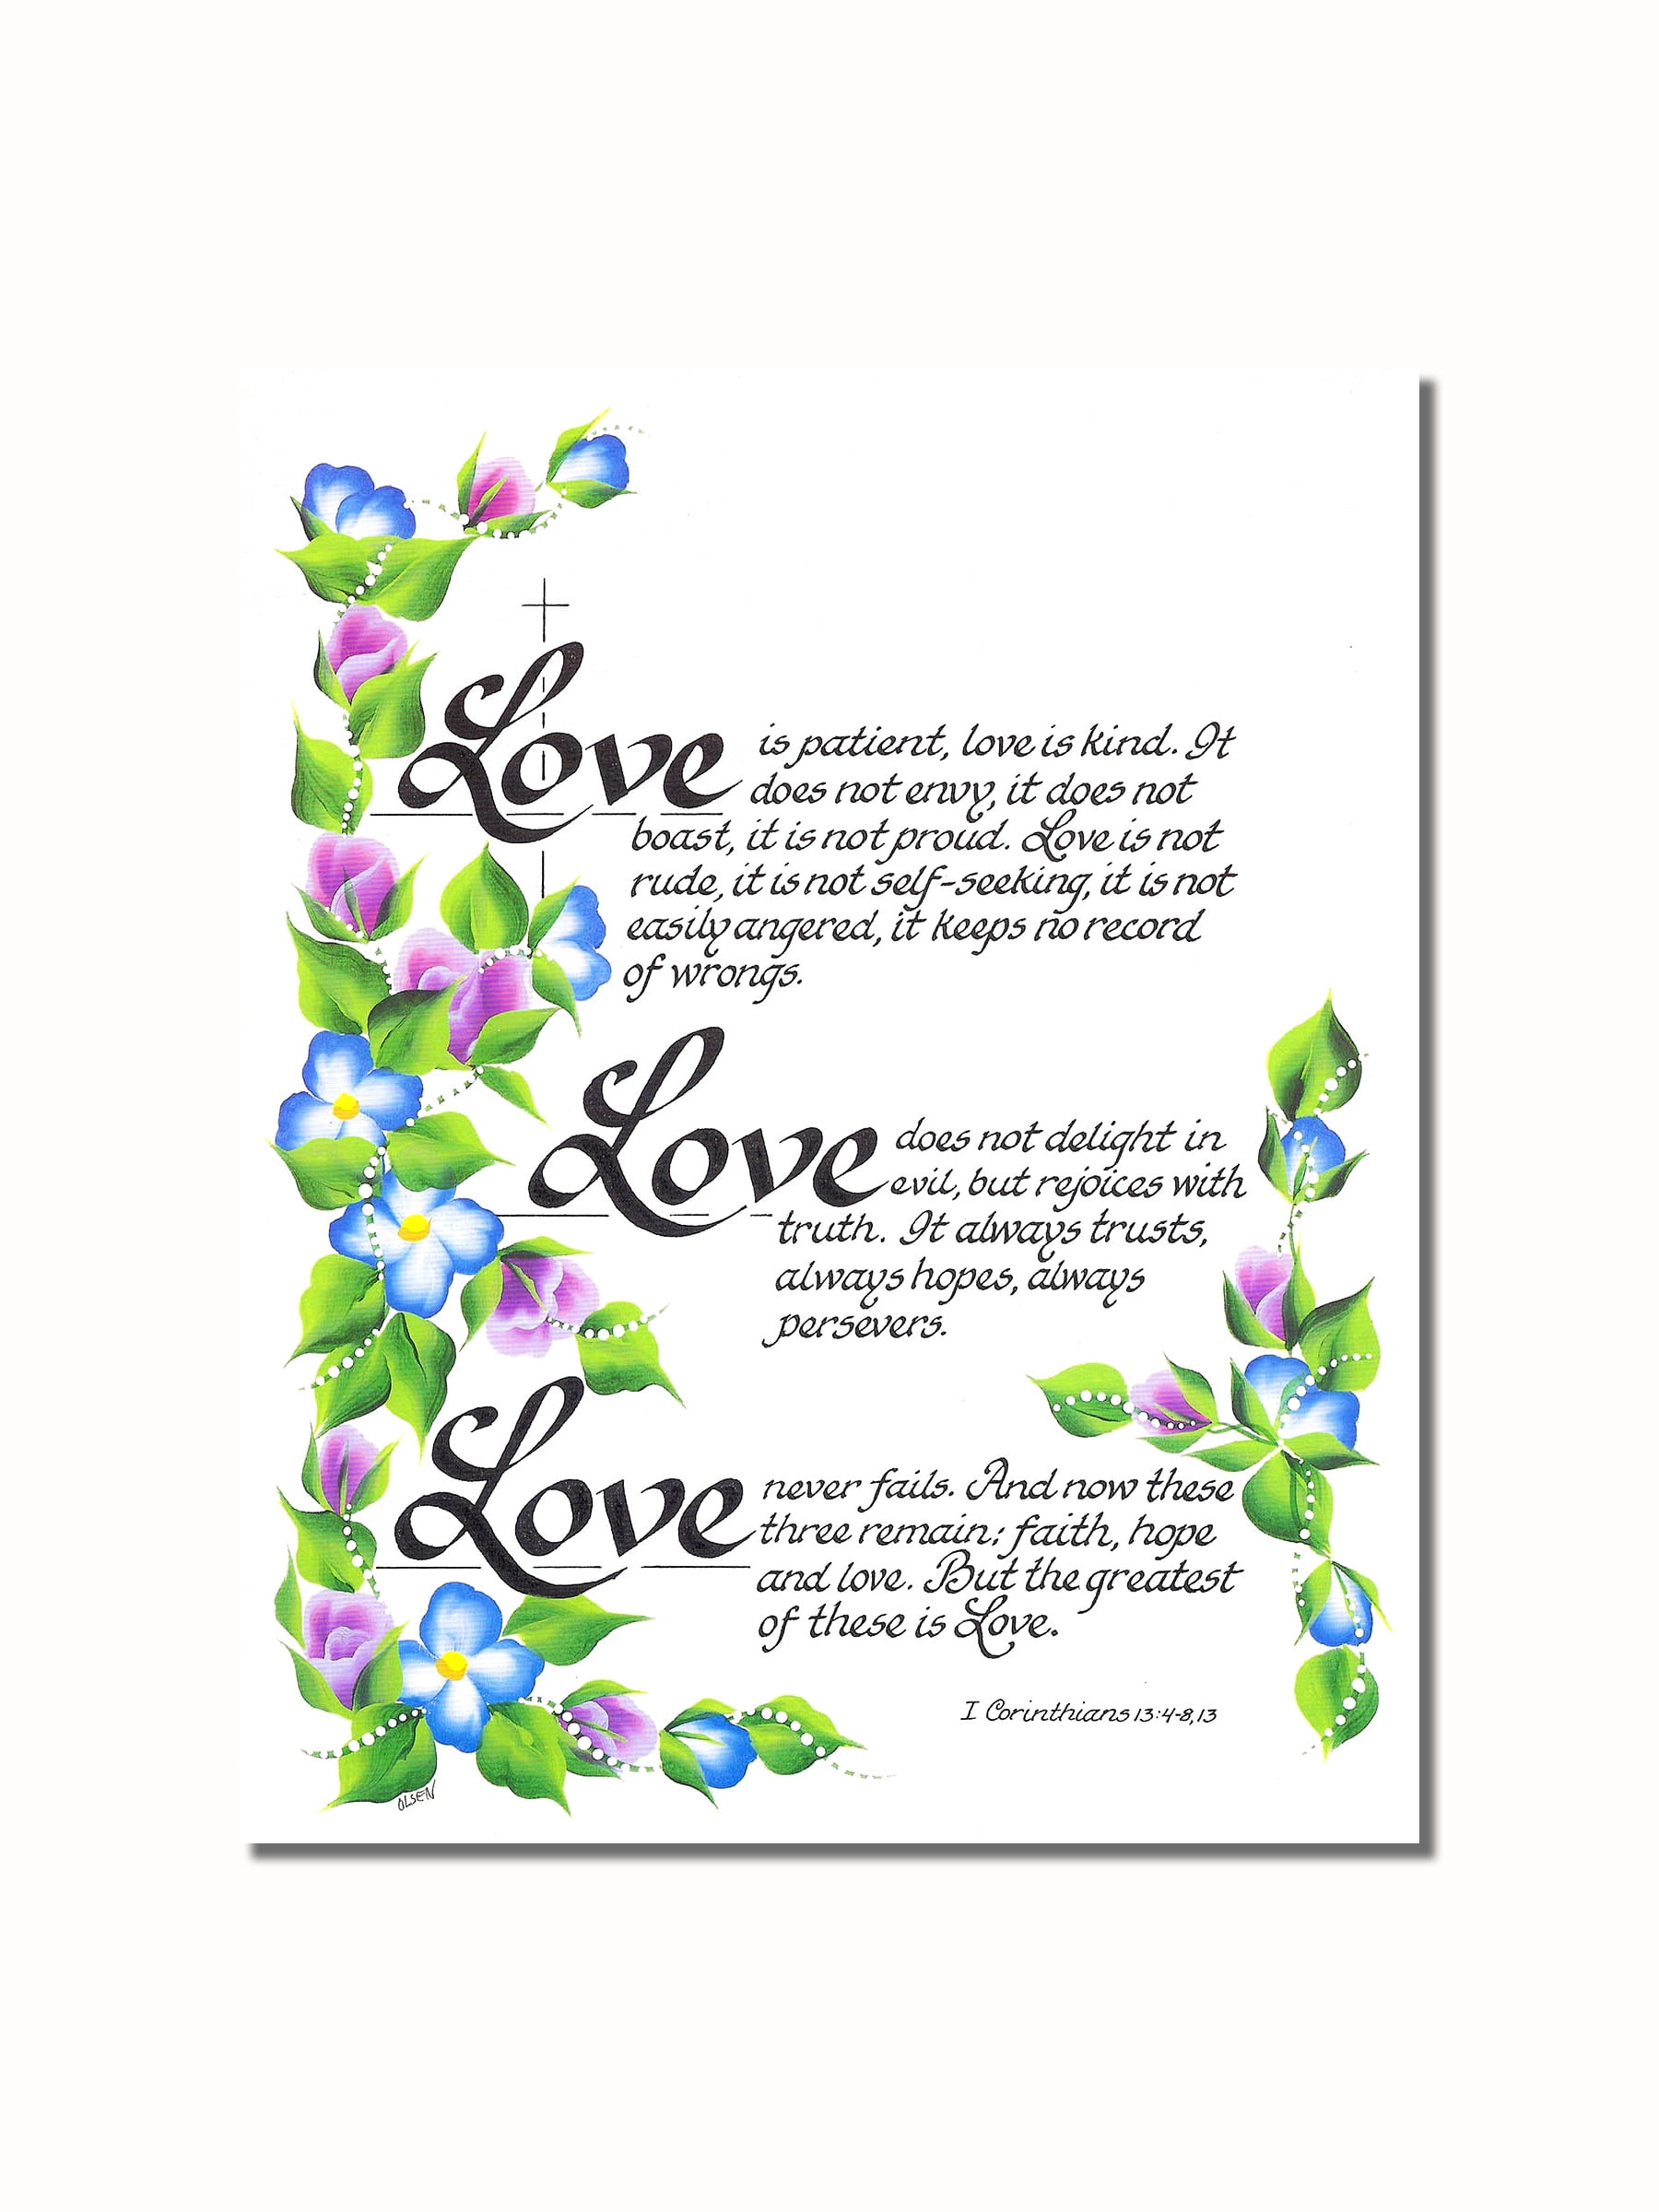 Mother I Love You Poem Roses #3 Wall Picture 8x10 Art Print 